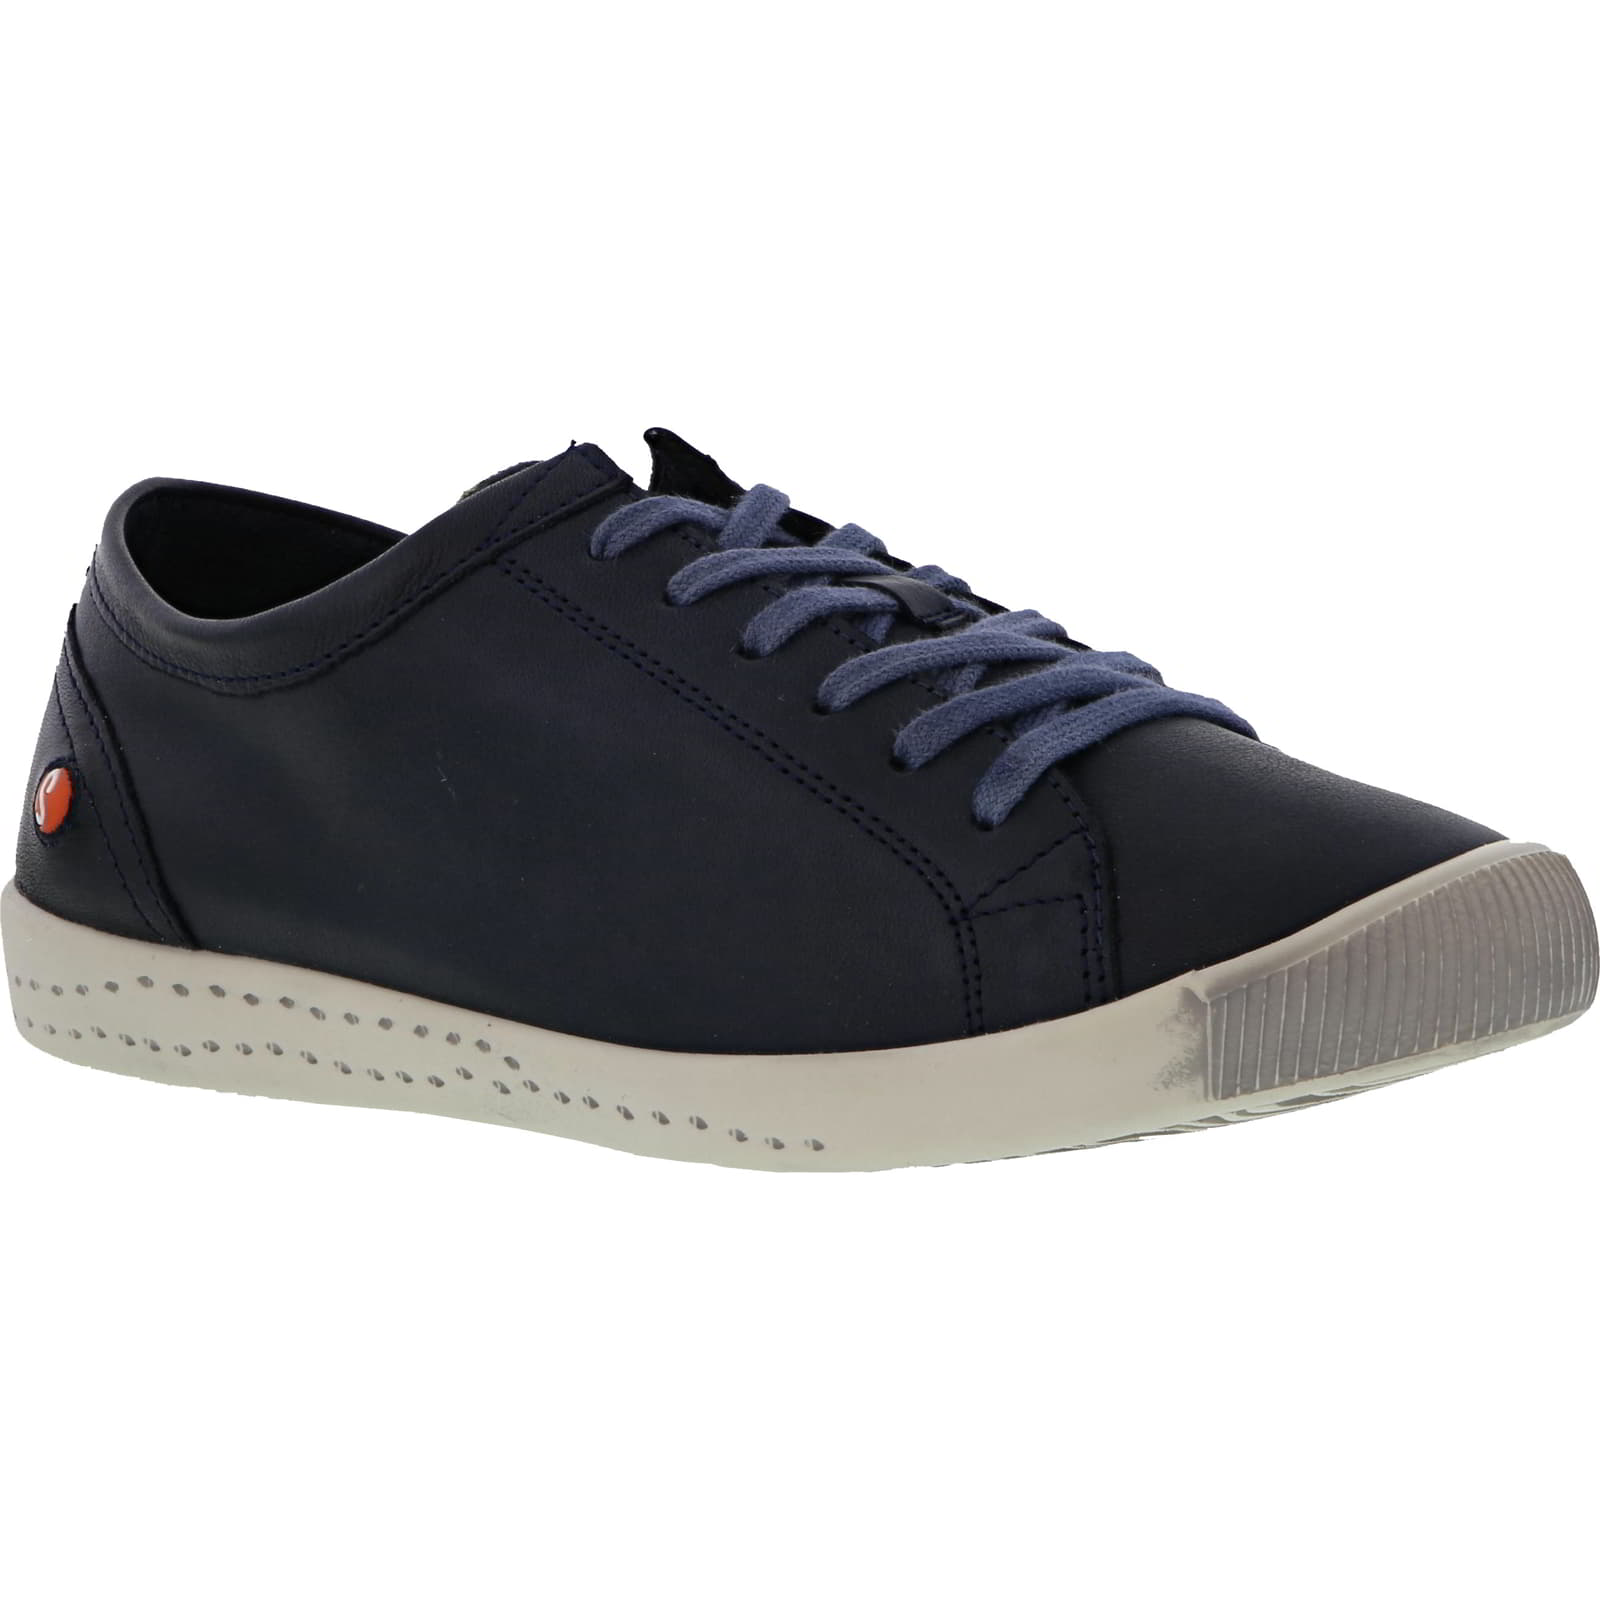 Softinos By Fly London Women's Isla Leather Trainers - Washed Navy - UK 6